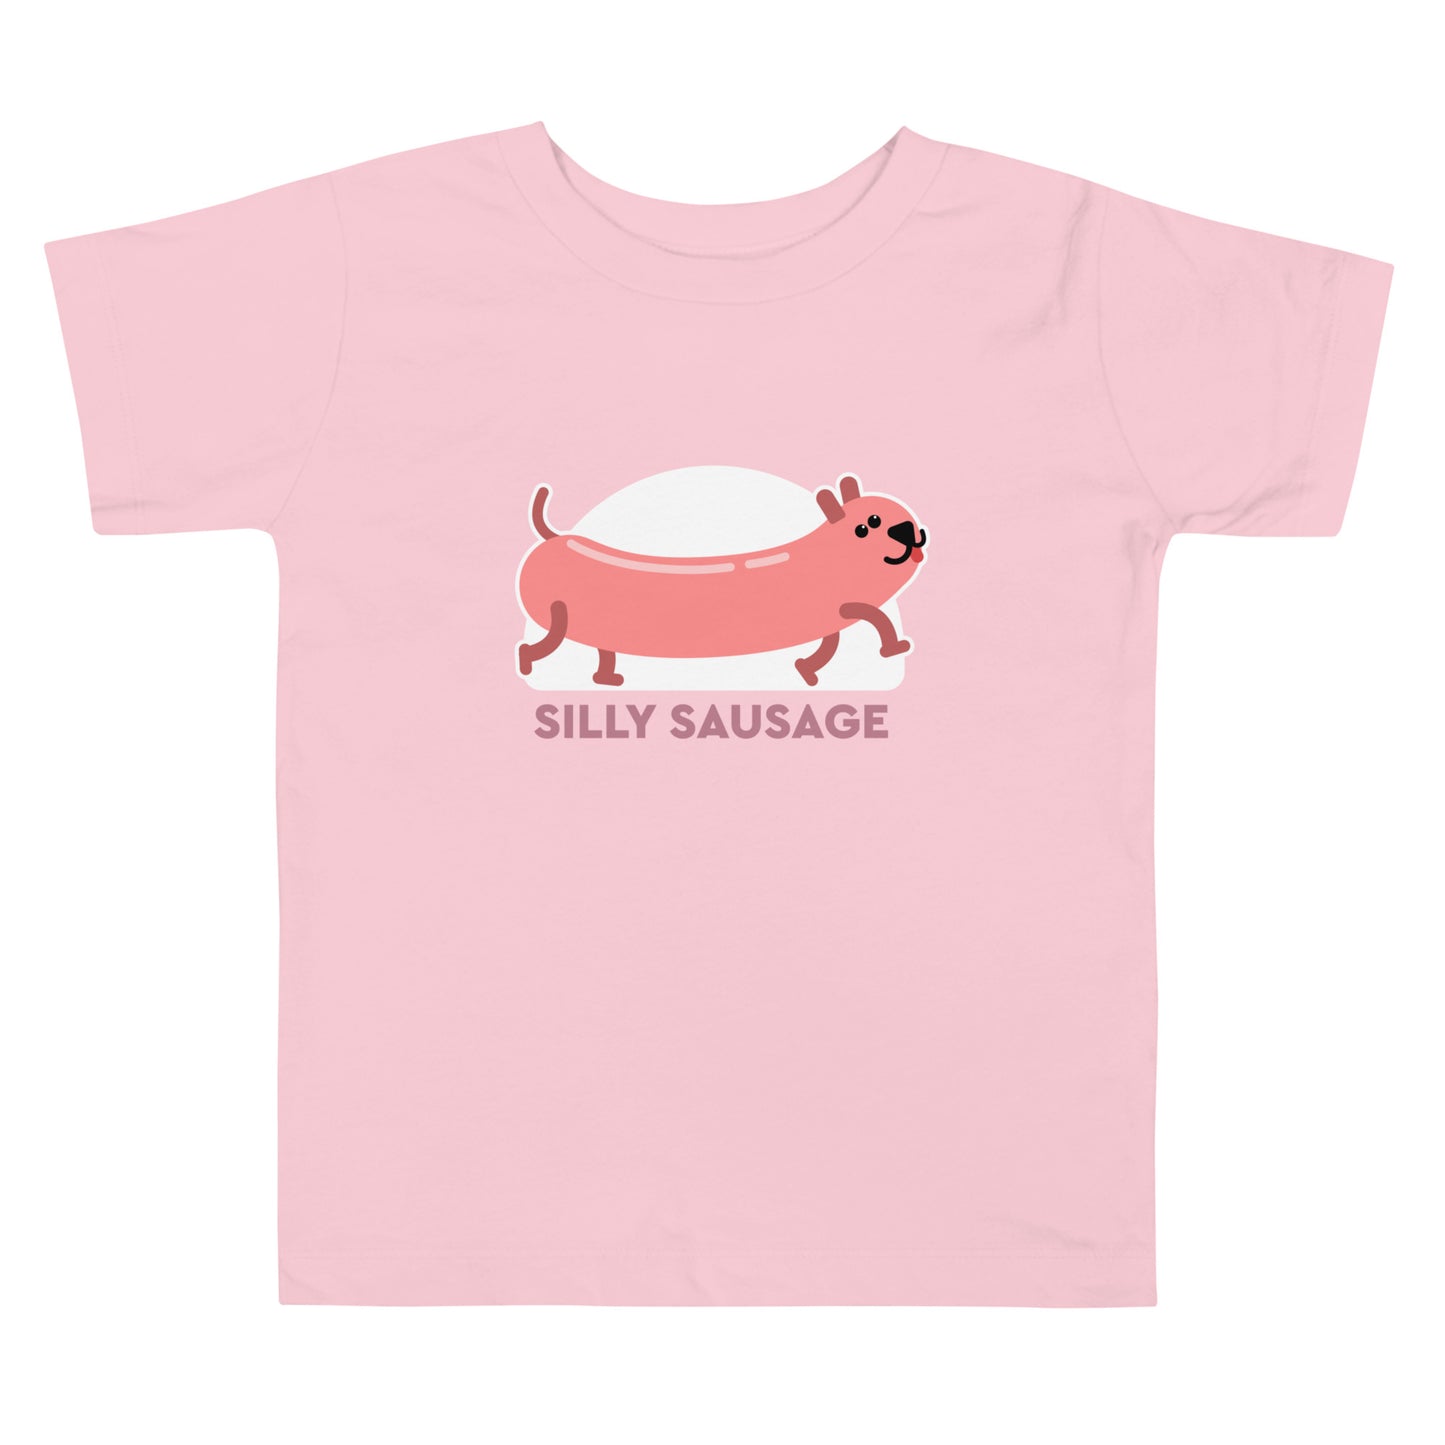 Toddler - Silly Sausage - Short Sleeve Tee